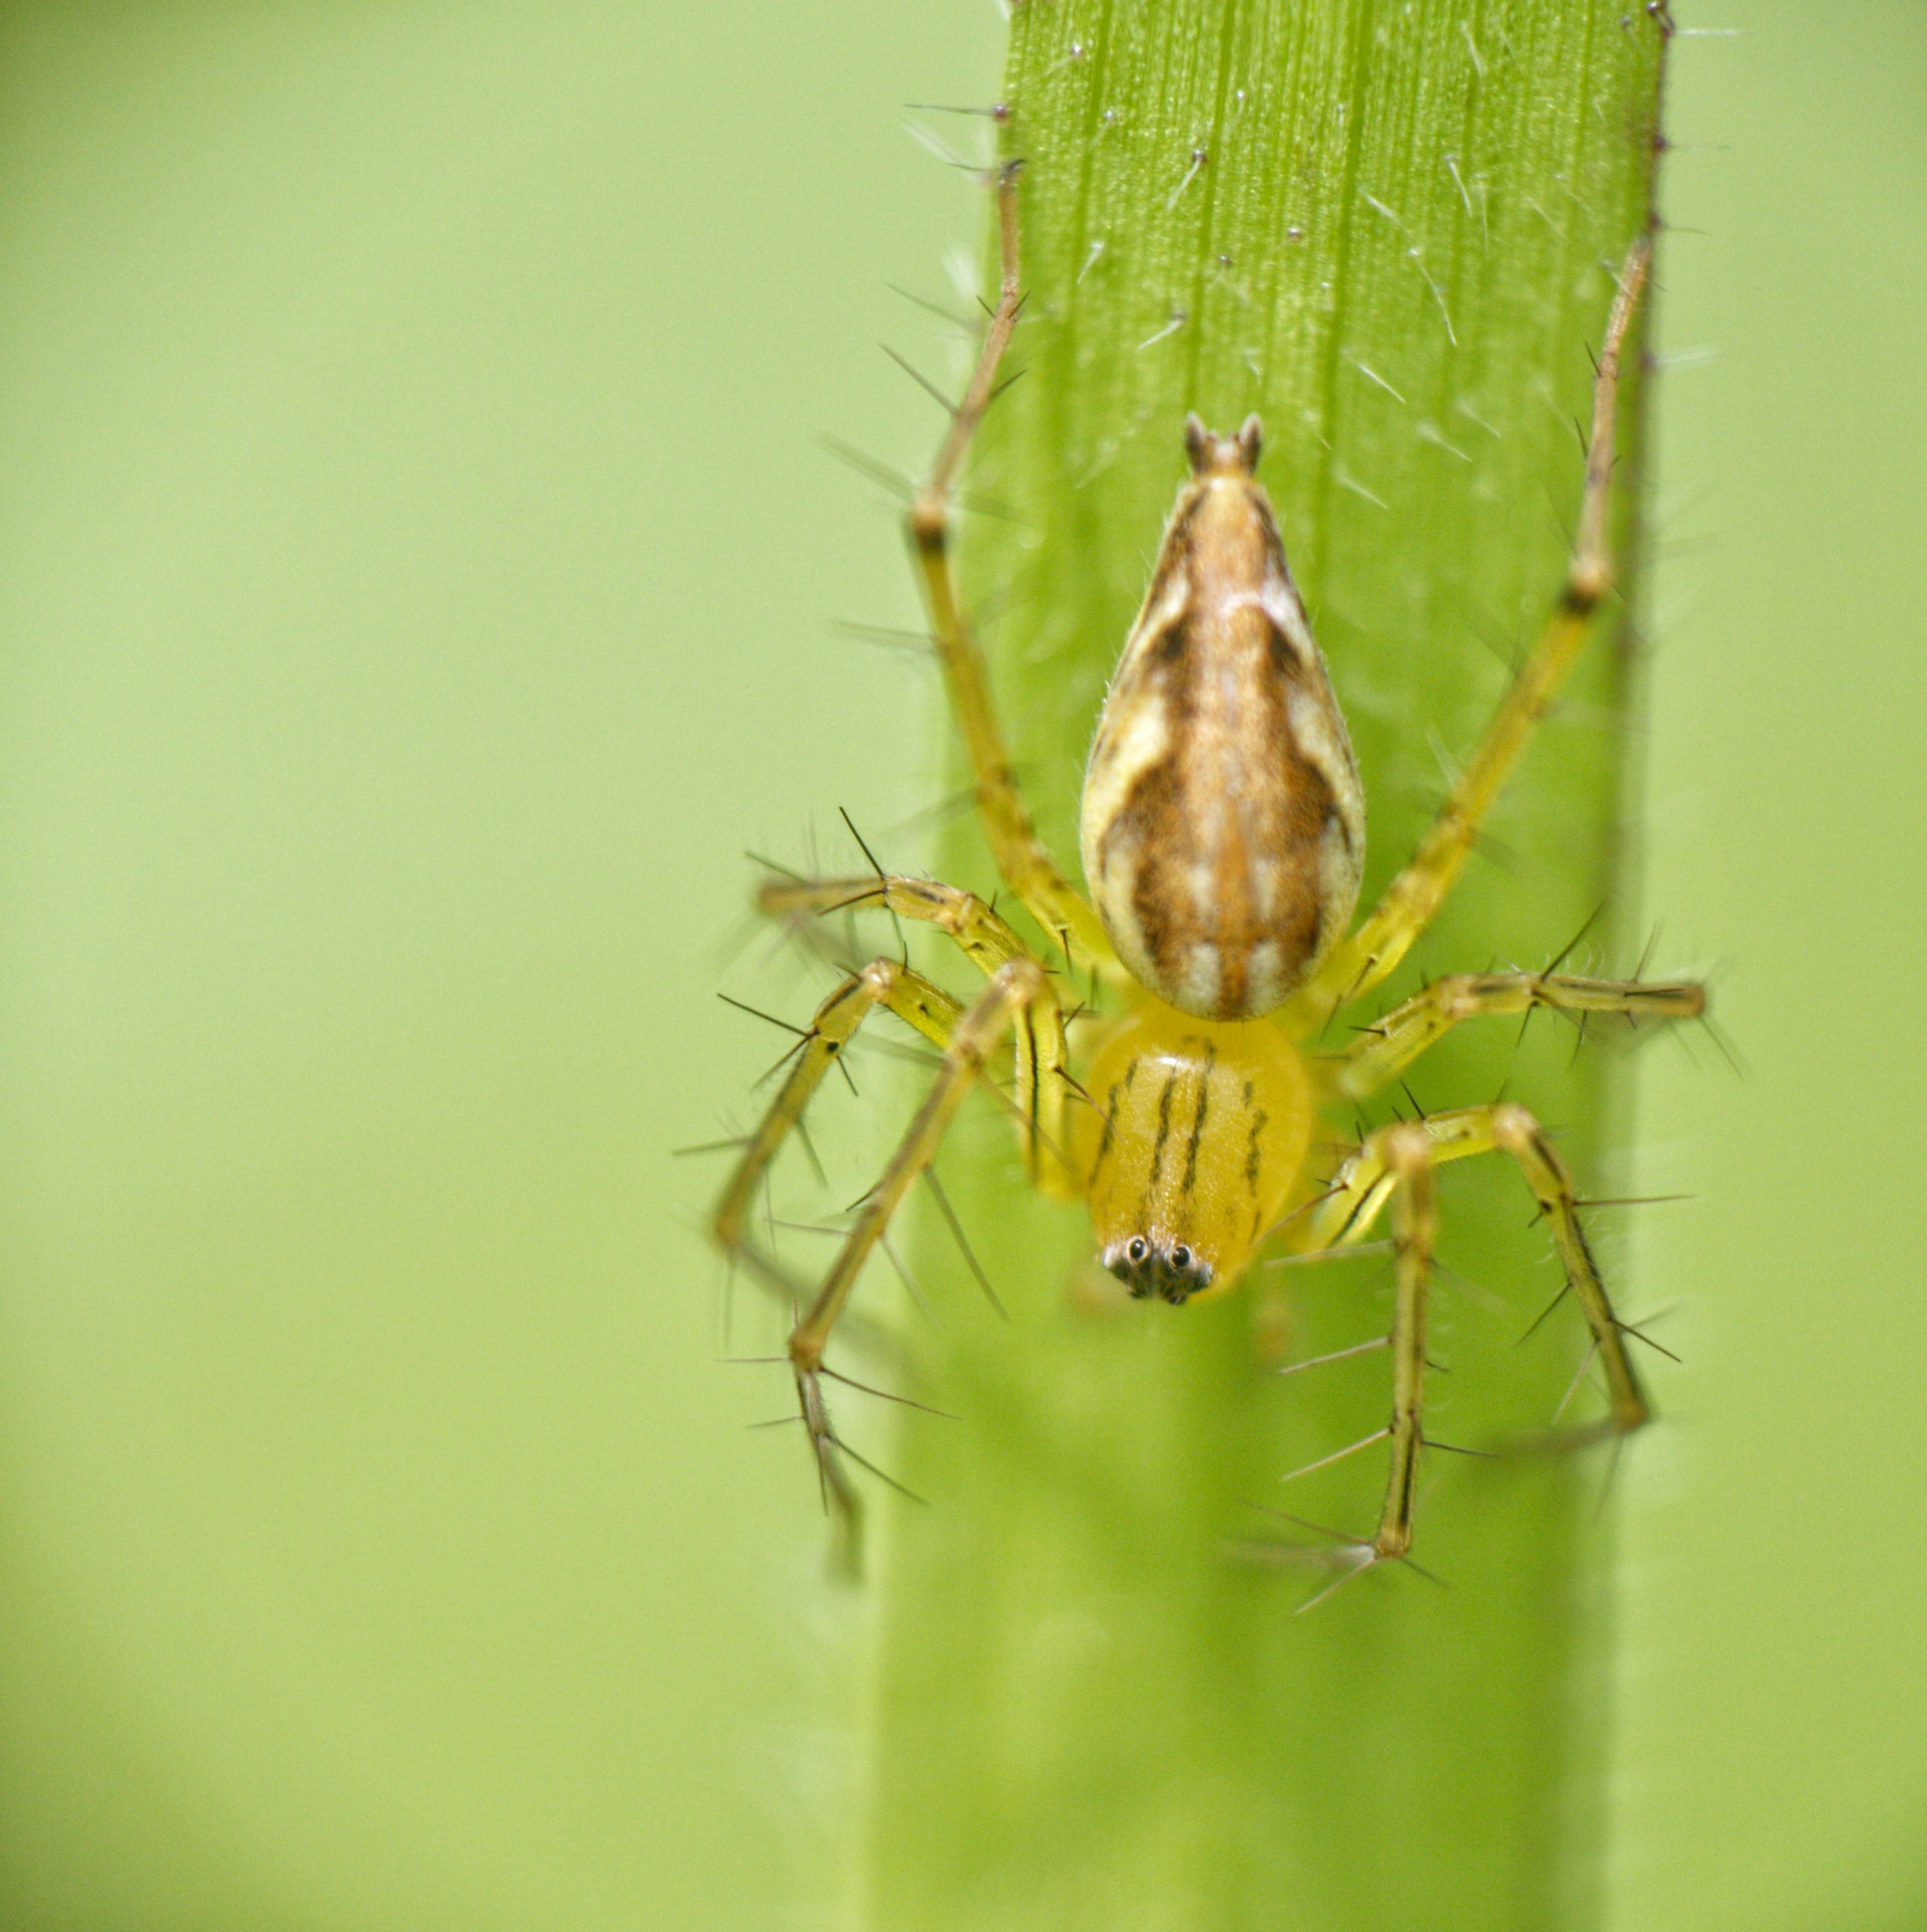 Hairy spider on a leaf